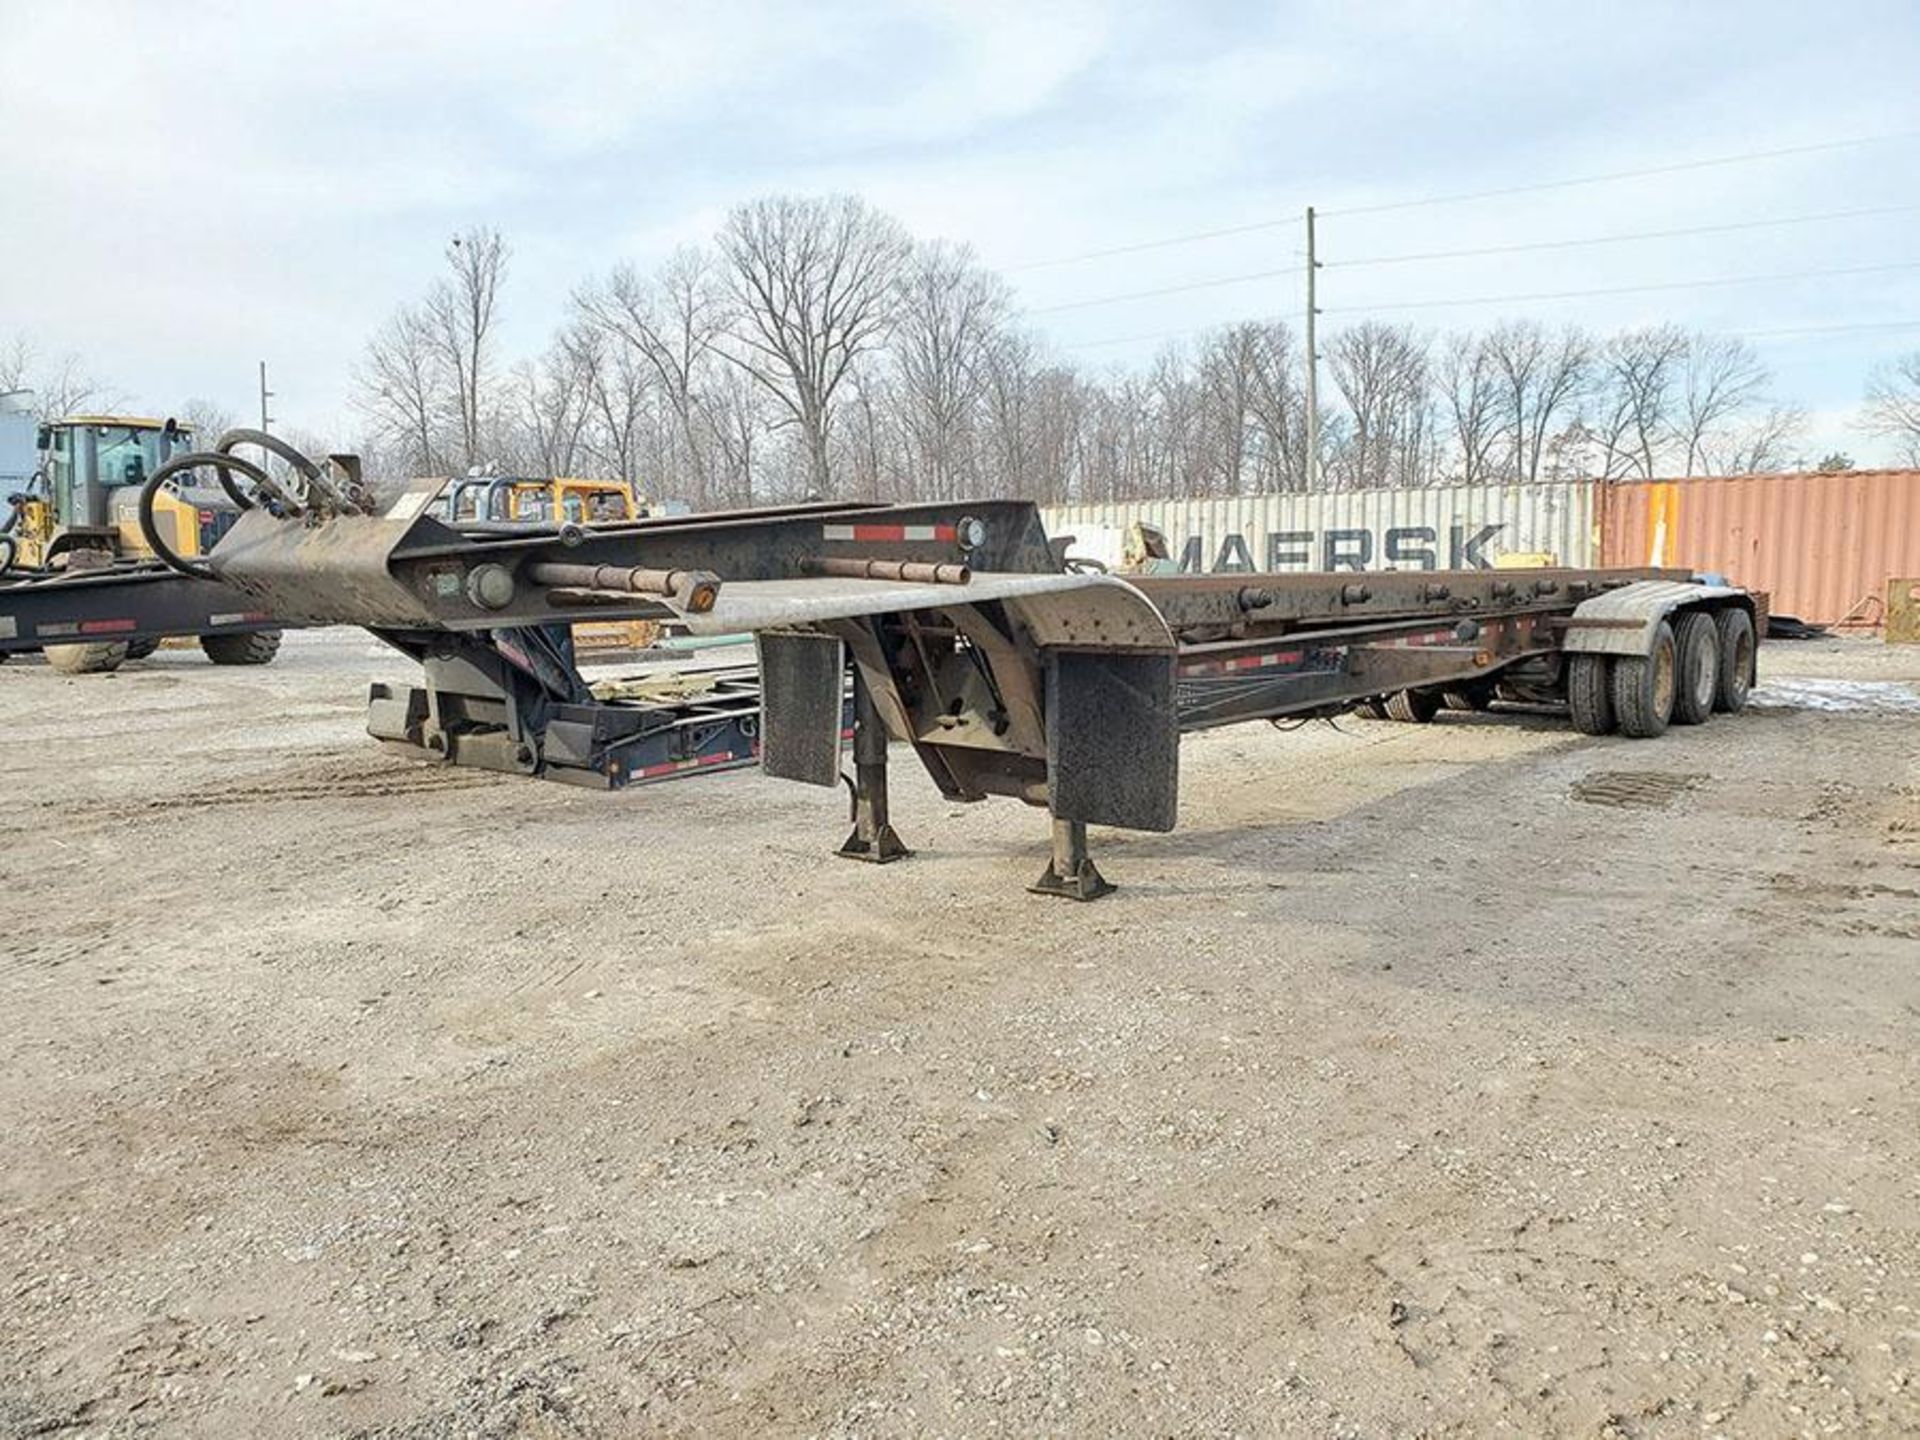 1994 48' Benlee Roll Off Container Trailer, Model TA60DD43, Vin 1B9B14339RA180970, Spread Axle, Air - Image 3 of 4